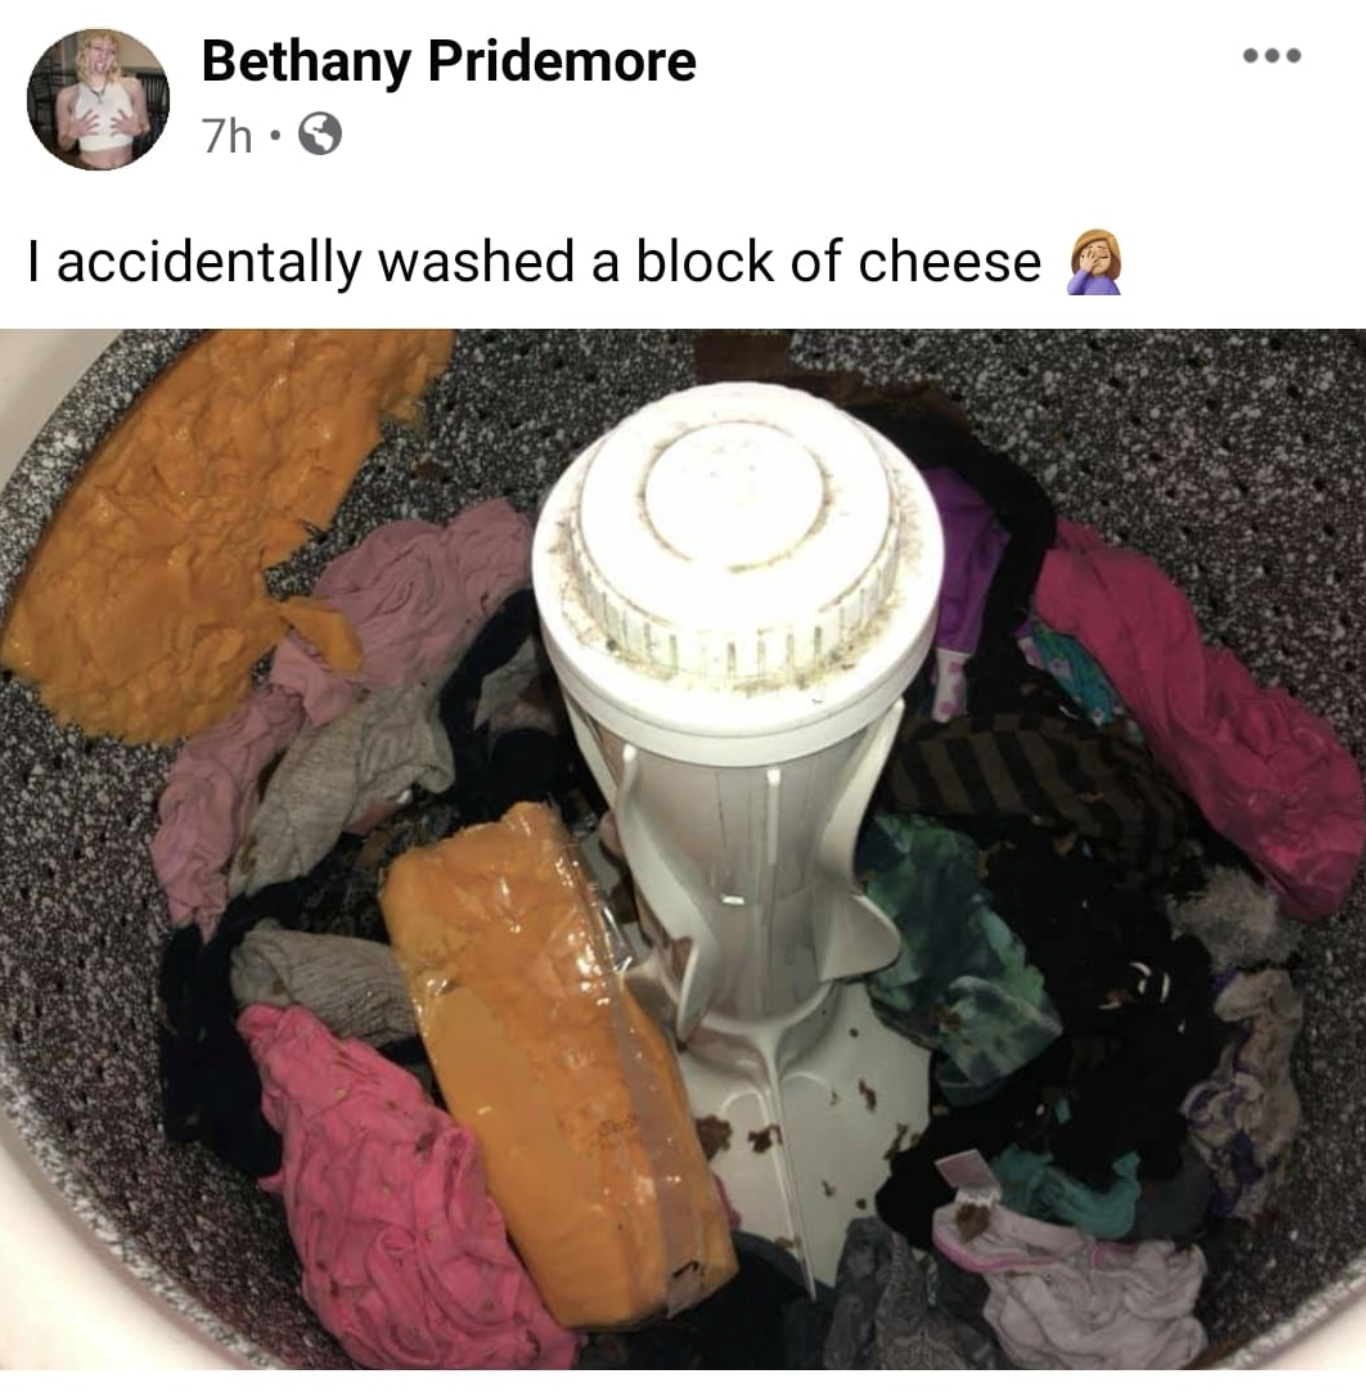 washing machine with a block of cheese in it